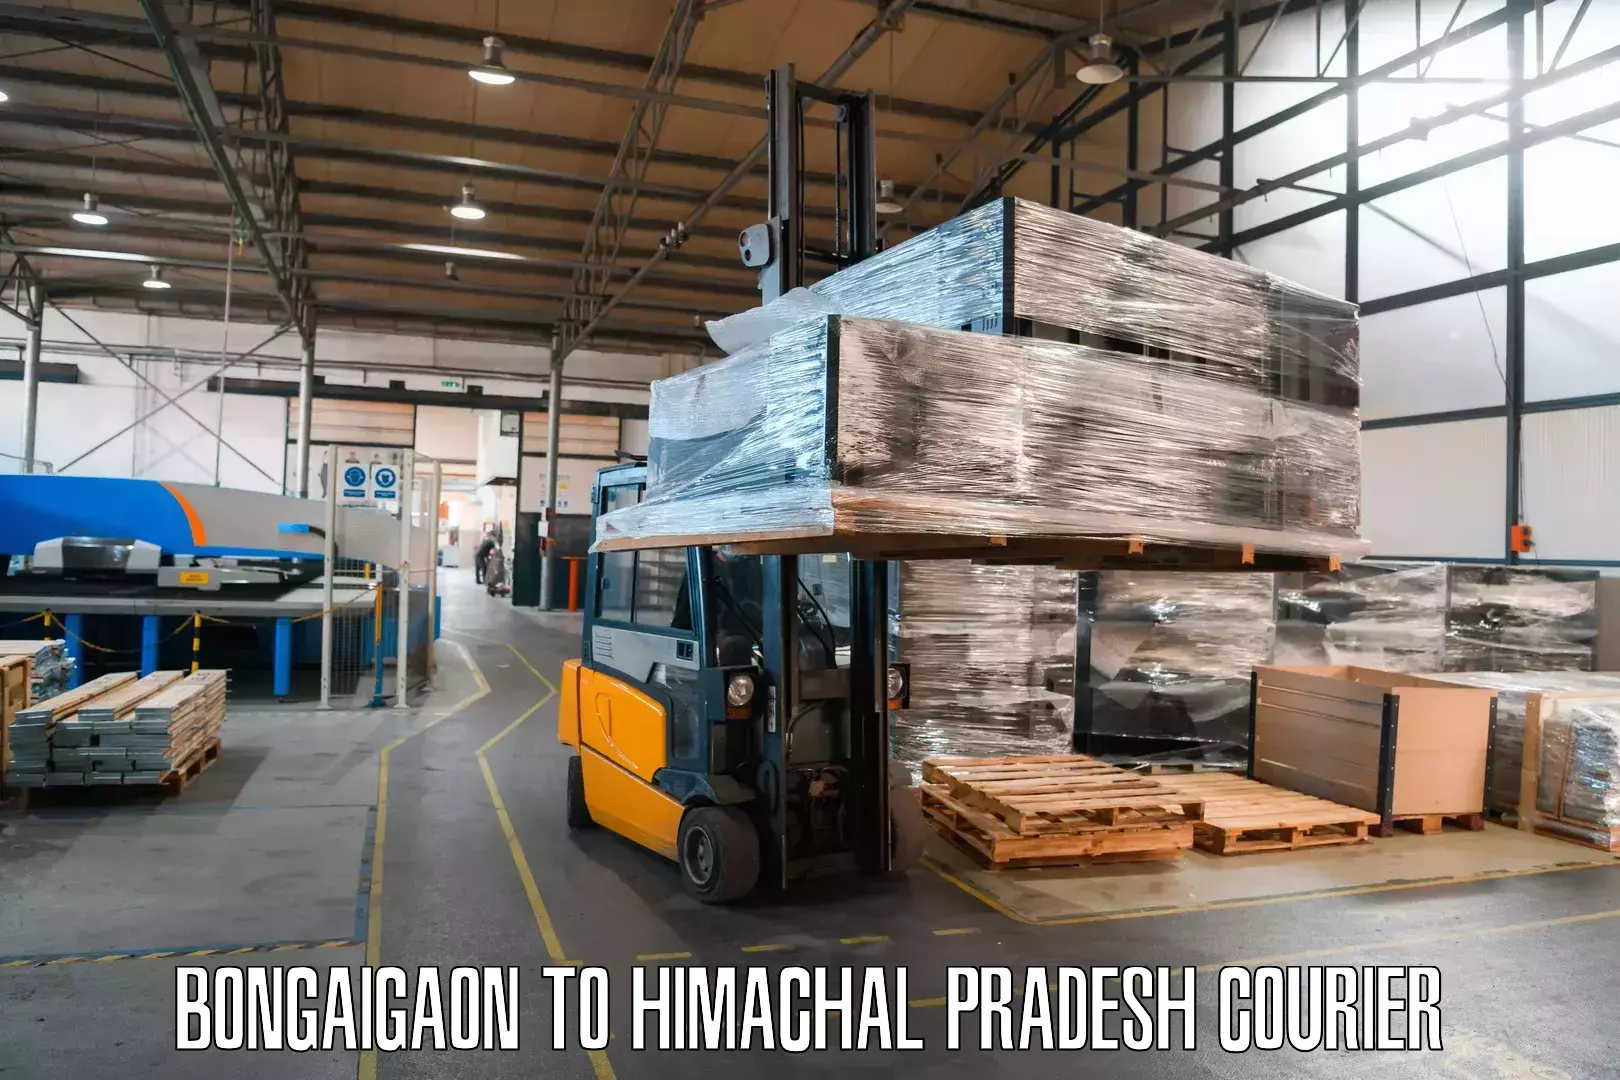 Package delivery network Bongaigaon to Himachal Pradesh